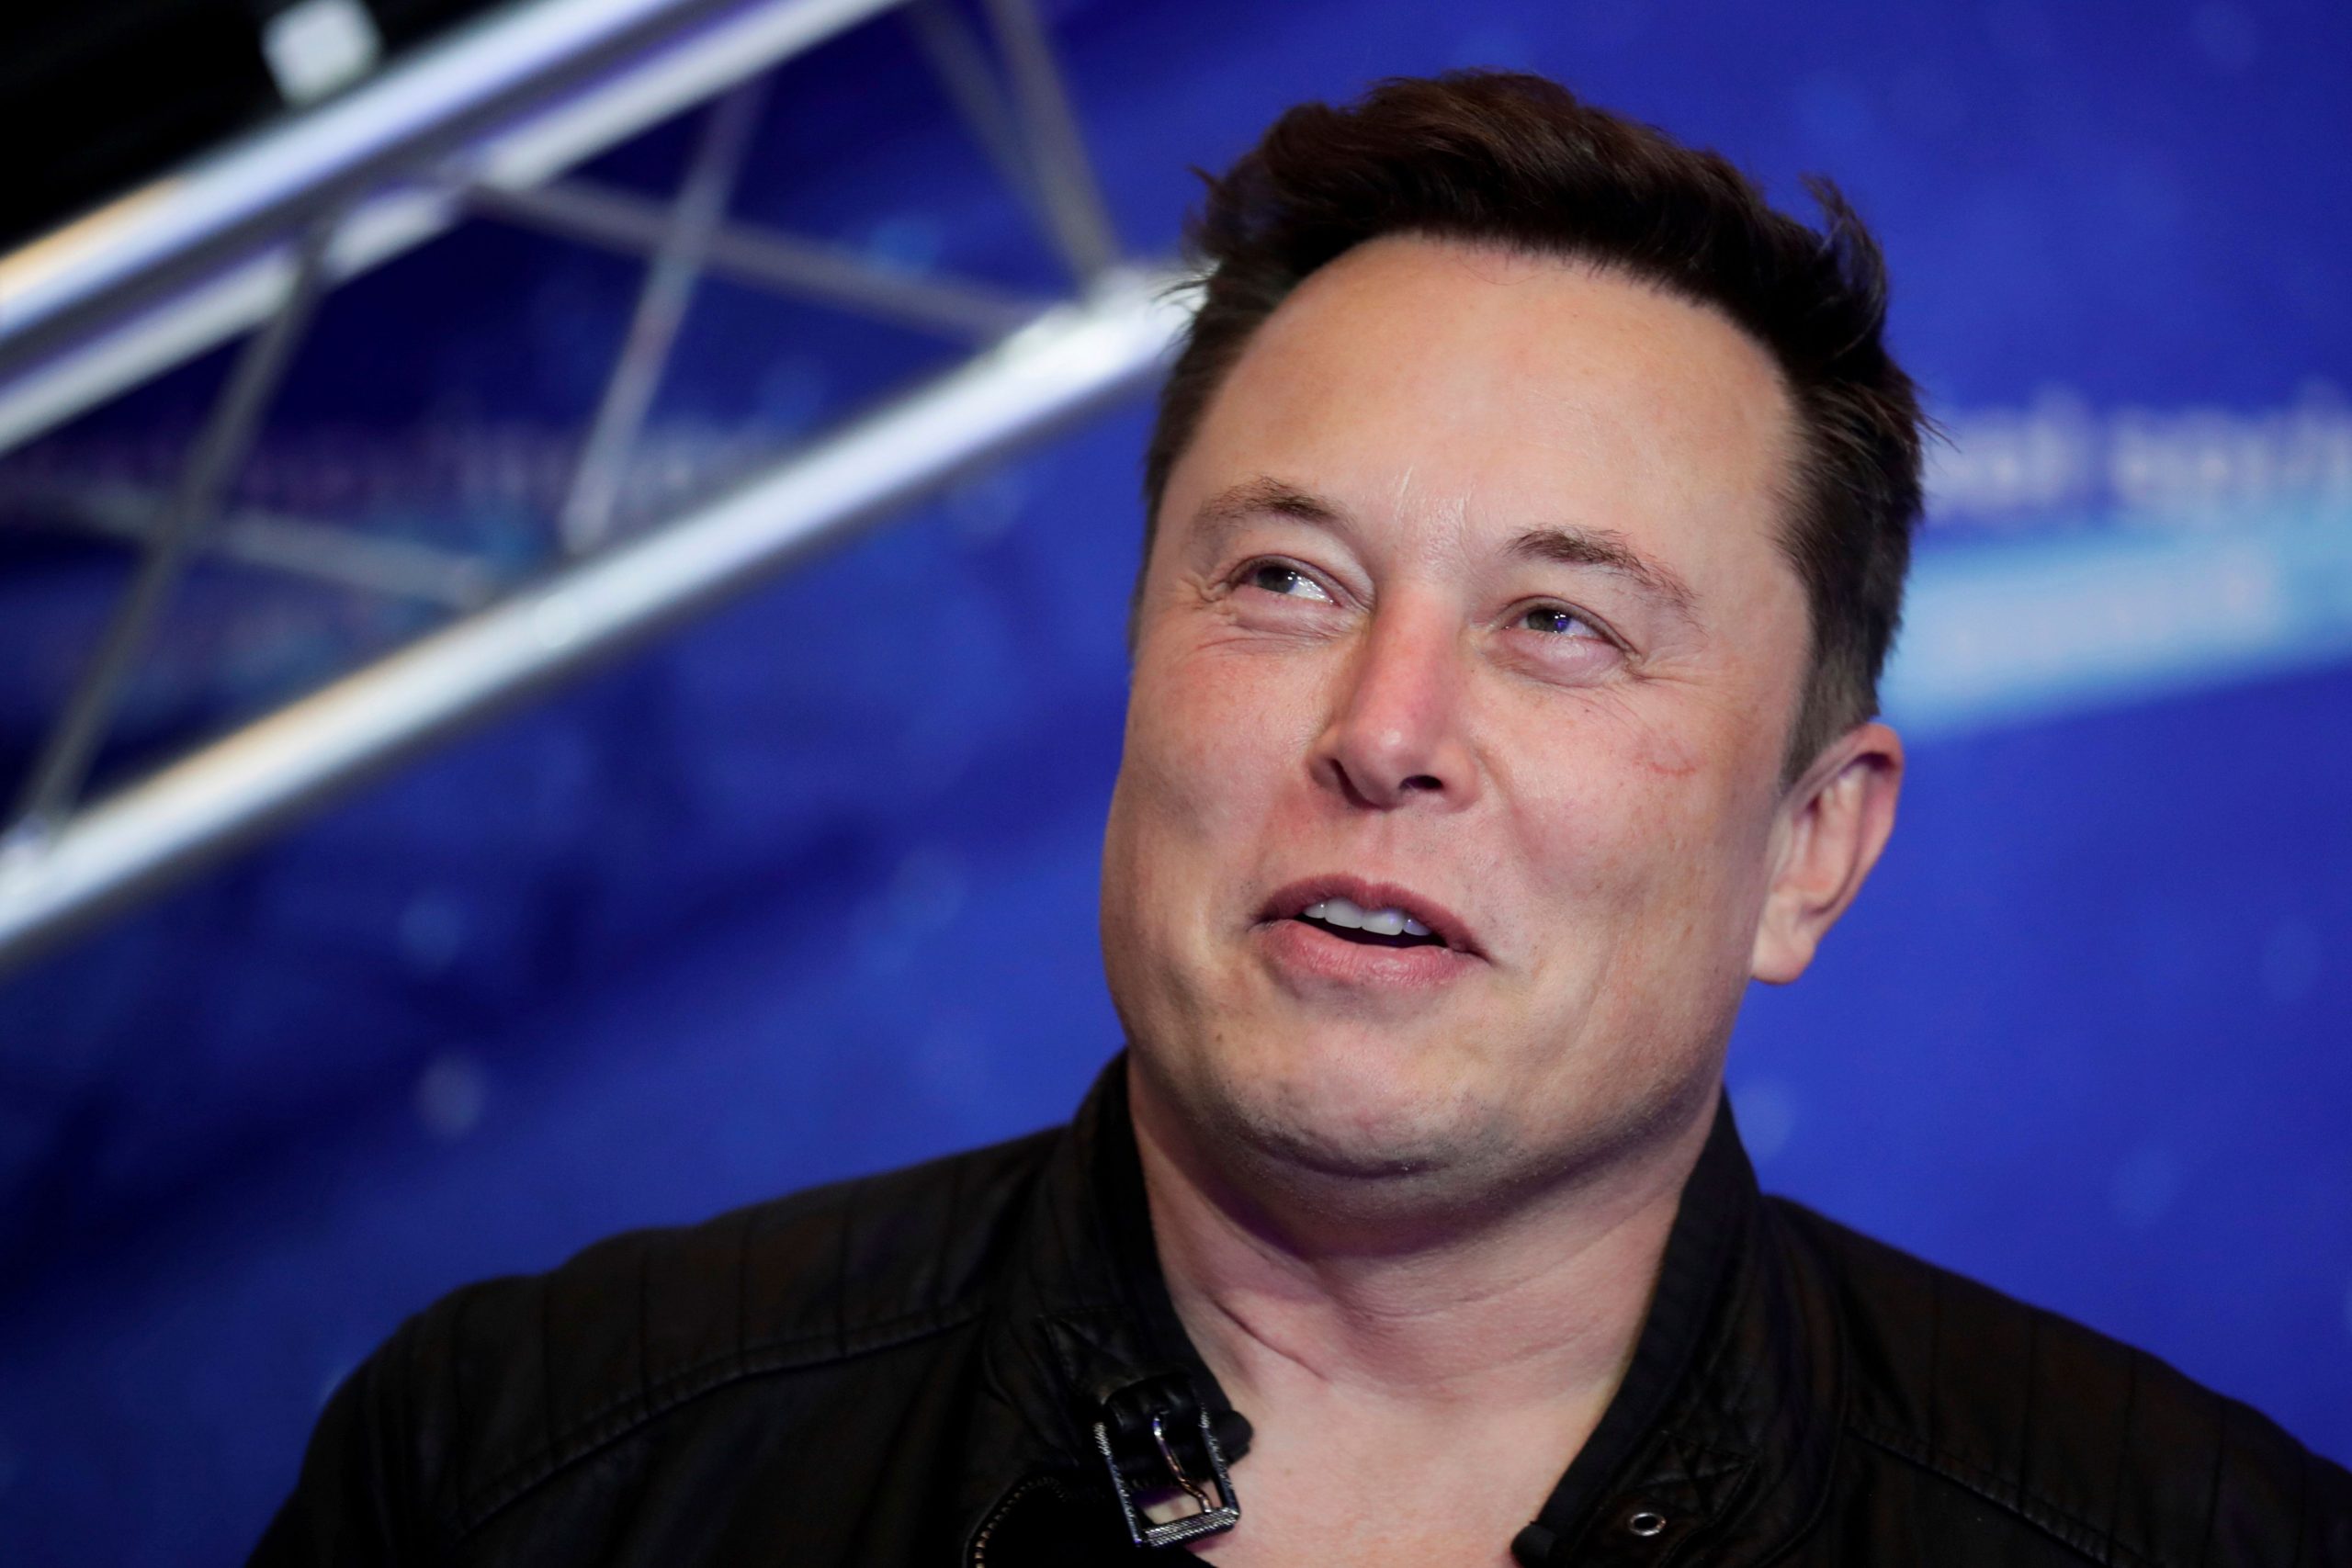 What Elon musk’s birthday says about him